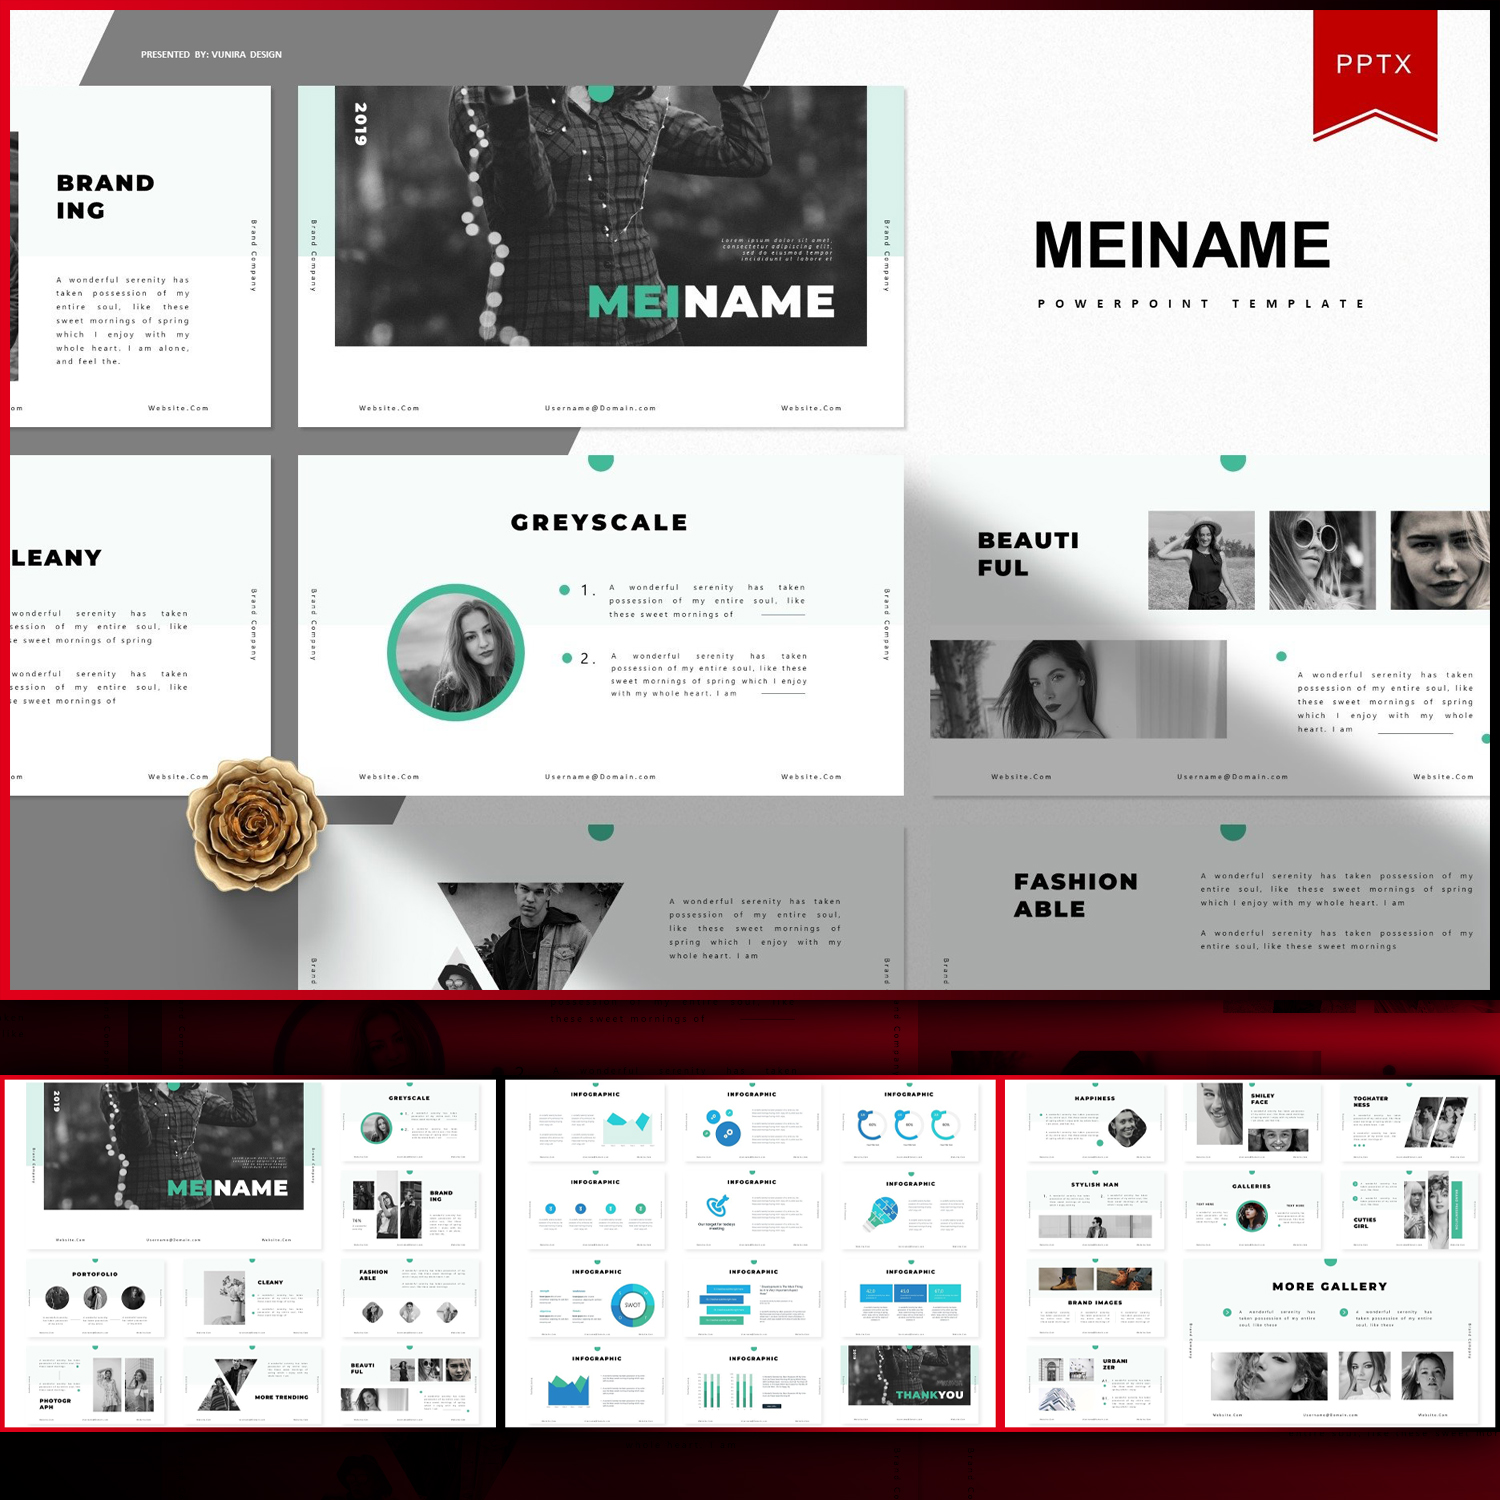 Images preview meiname powerpoint template.